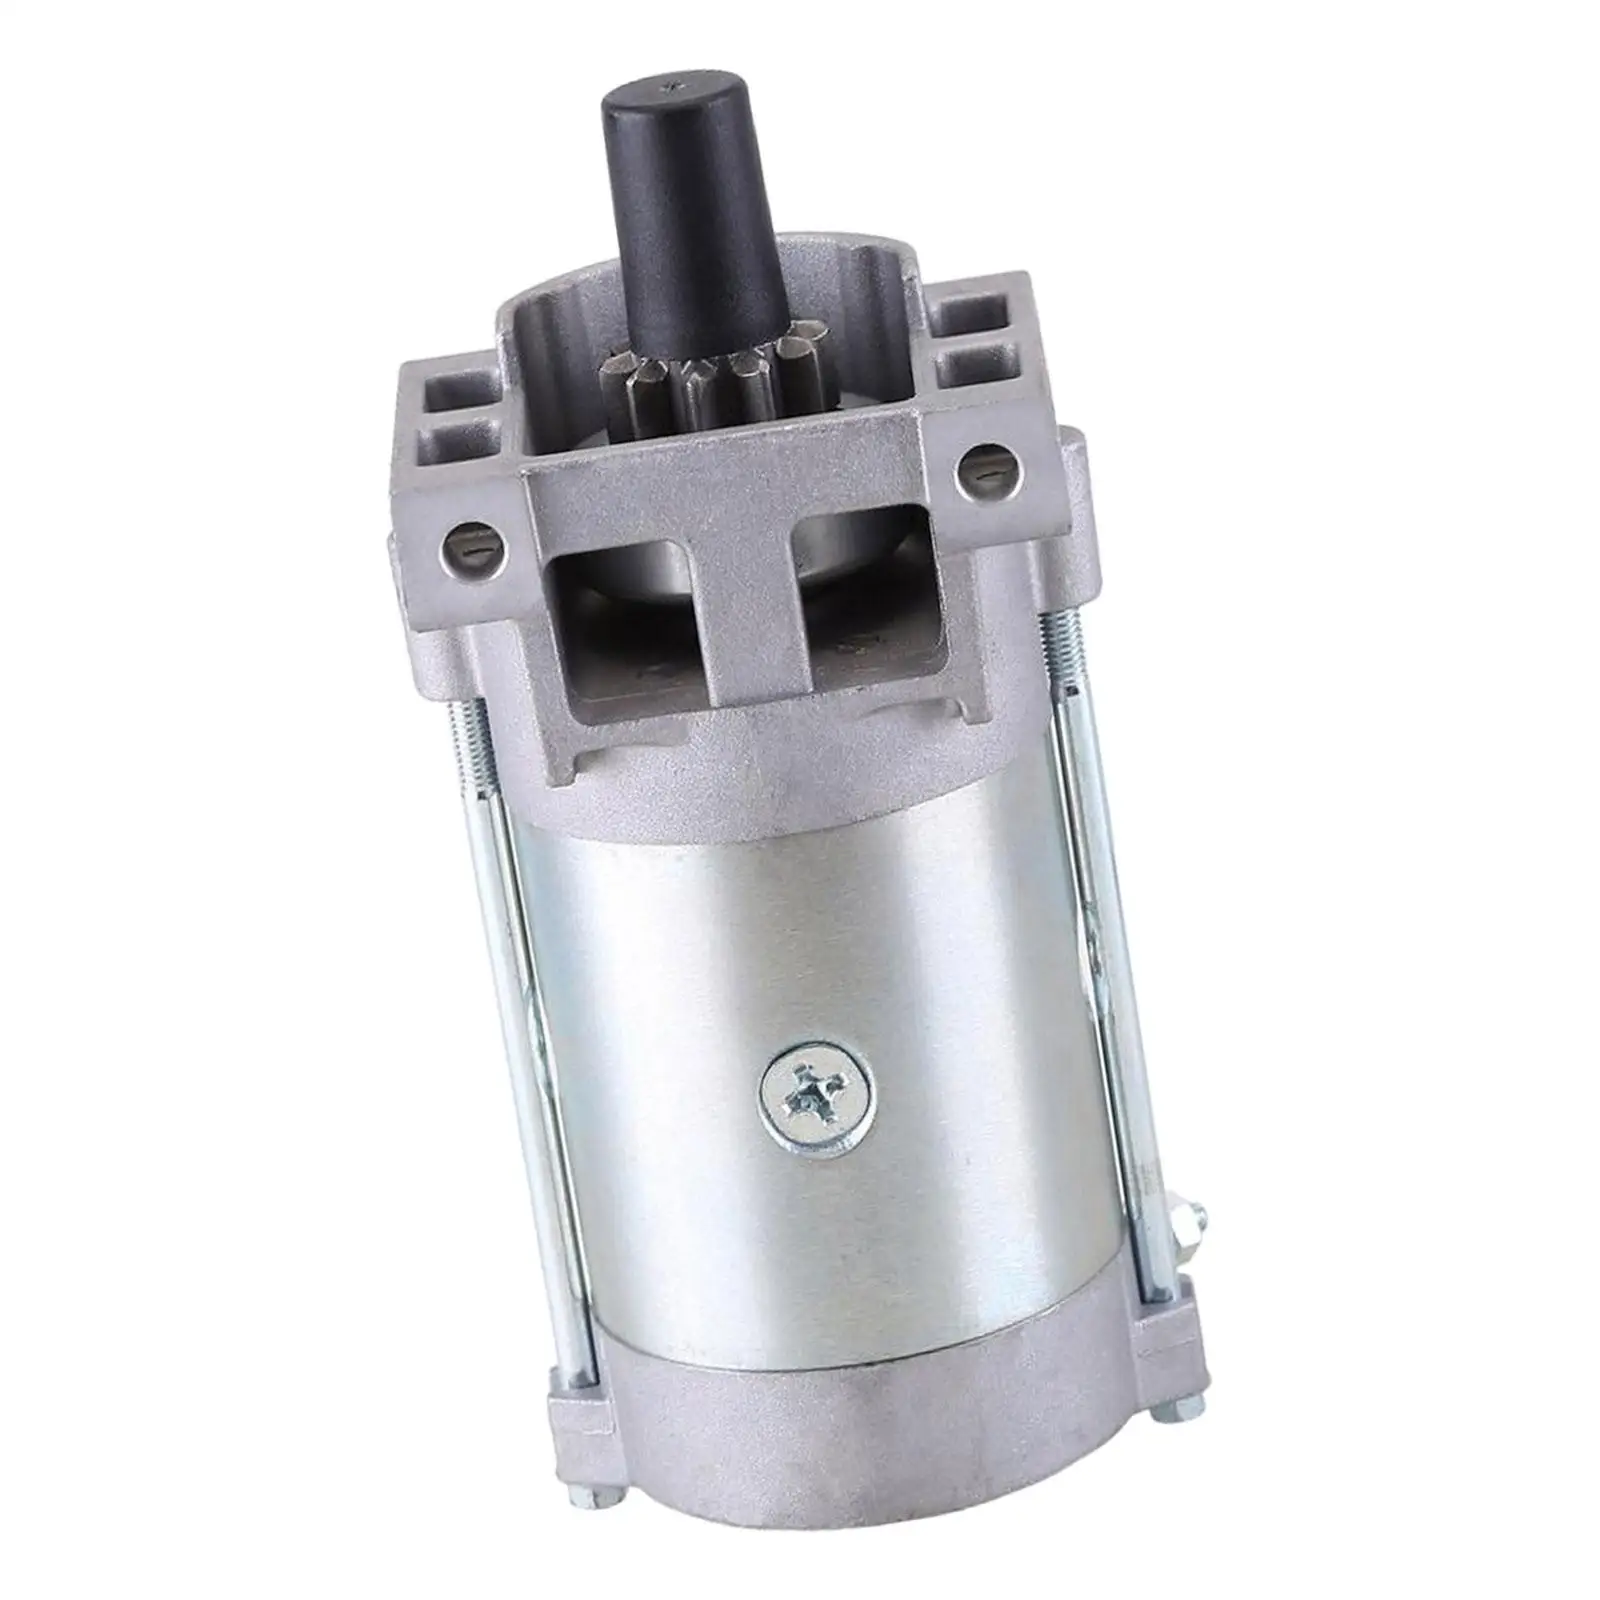 Starter Motor Replaces Easy to Install Professional Motors Starter Parts Durable 21110533 127-9209 133-1564 133-9828 136-7880